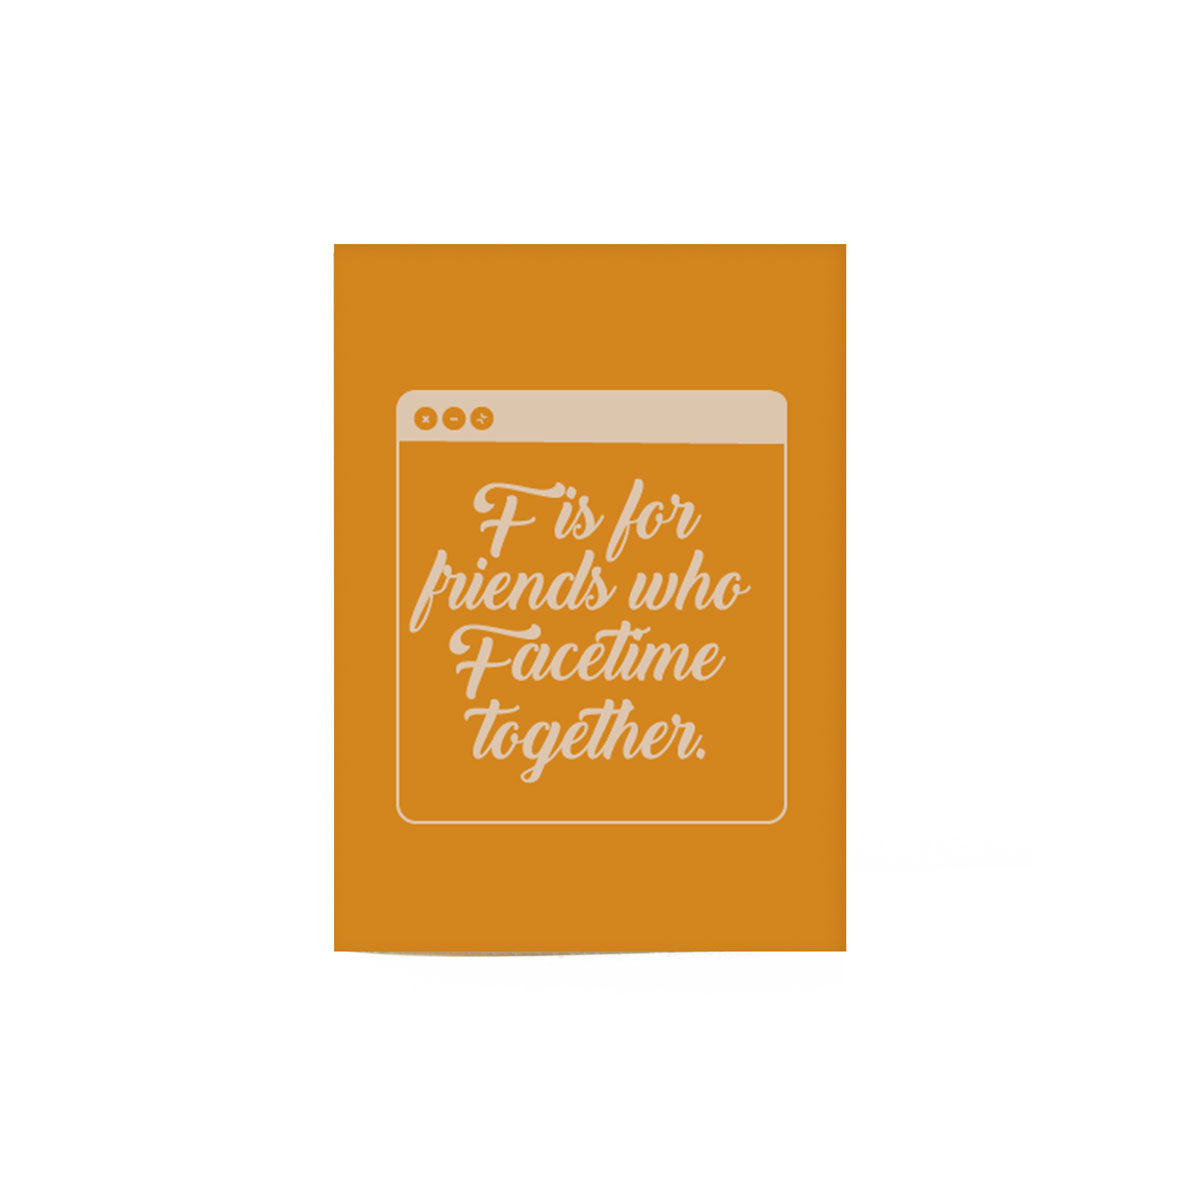 dark yellow FaceTime friends card that reads "F is for friends who facetime together." inside a white browser window illustration.